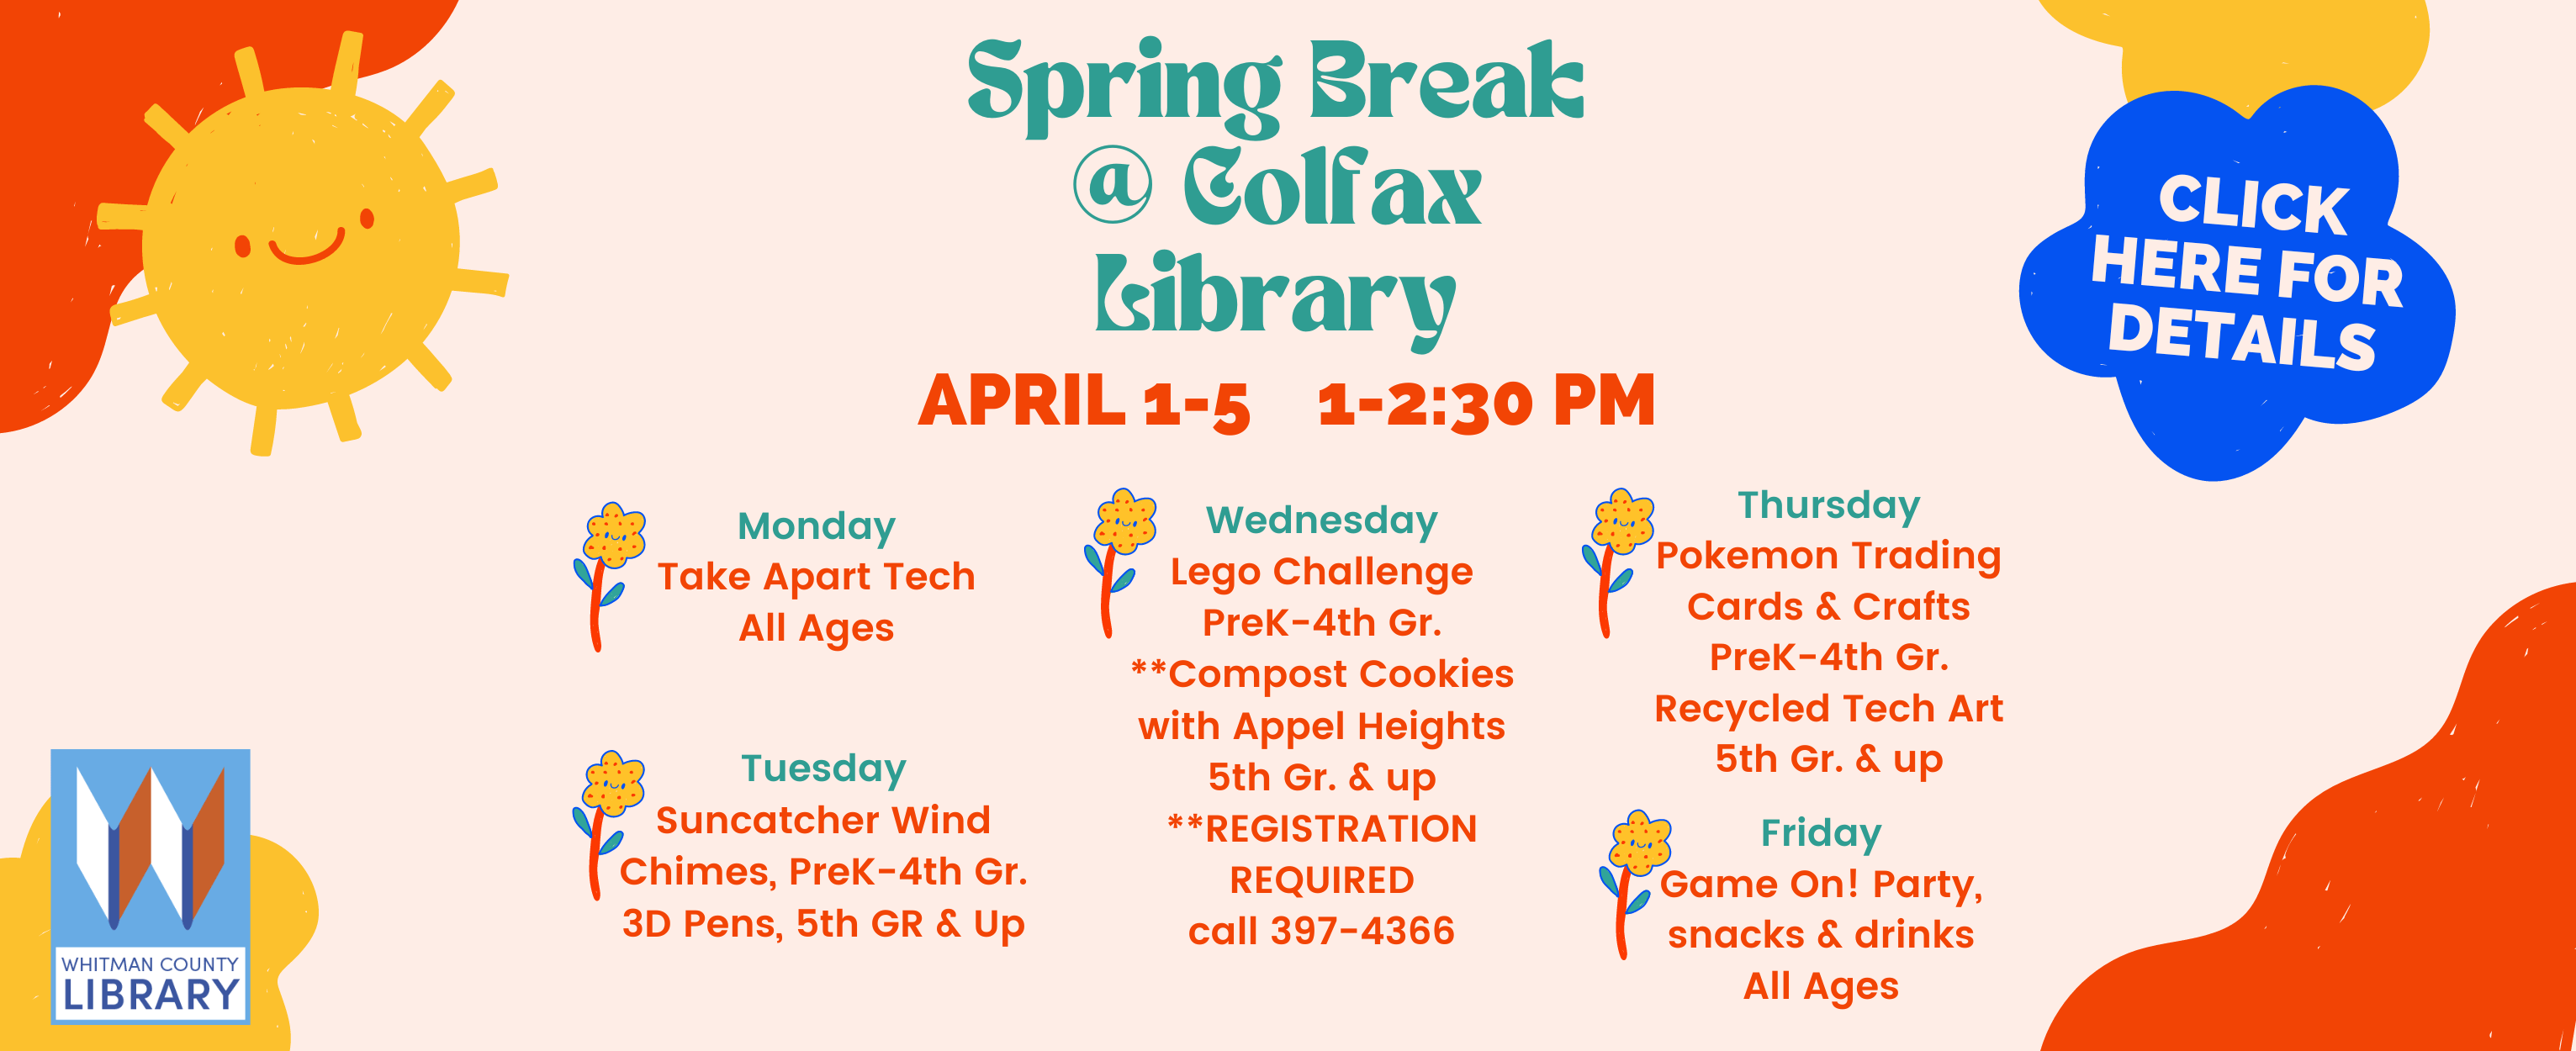 All-ages spring break programming is happening at our Colfax Library: Monday, April 1 through Friday, April 5. Every day from 1:00-2:30 PM. Click here for details. 